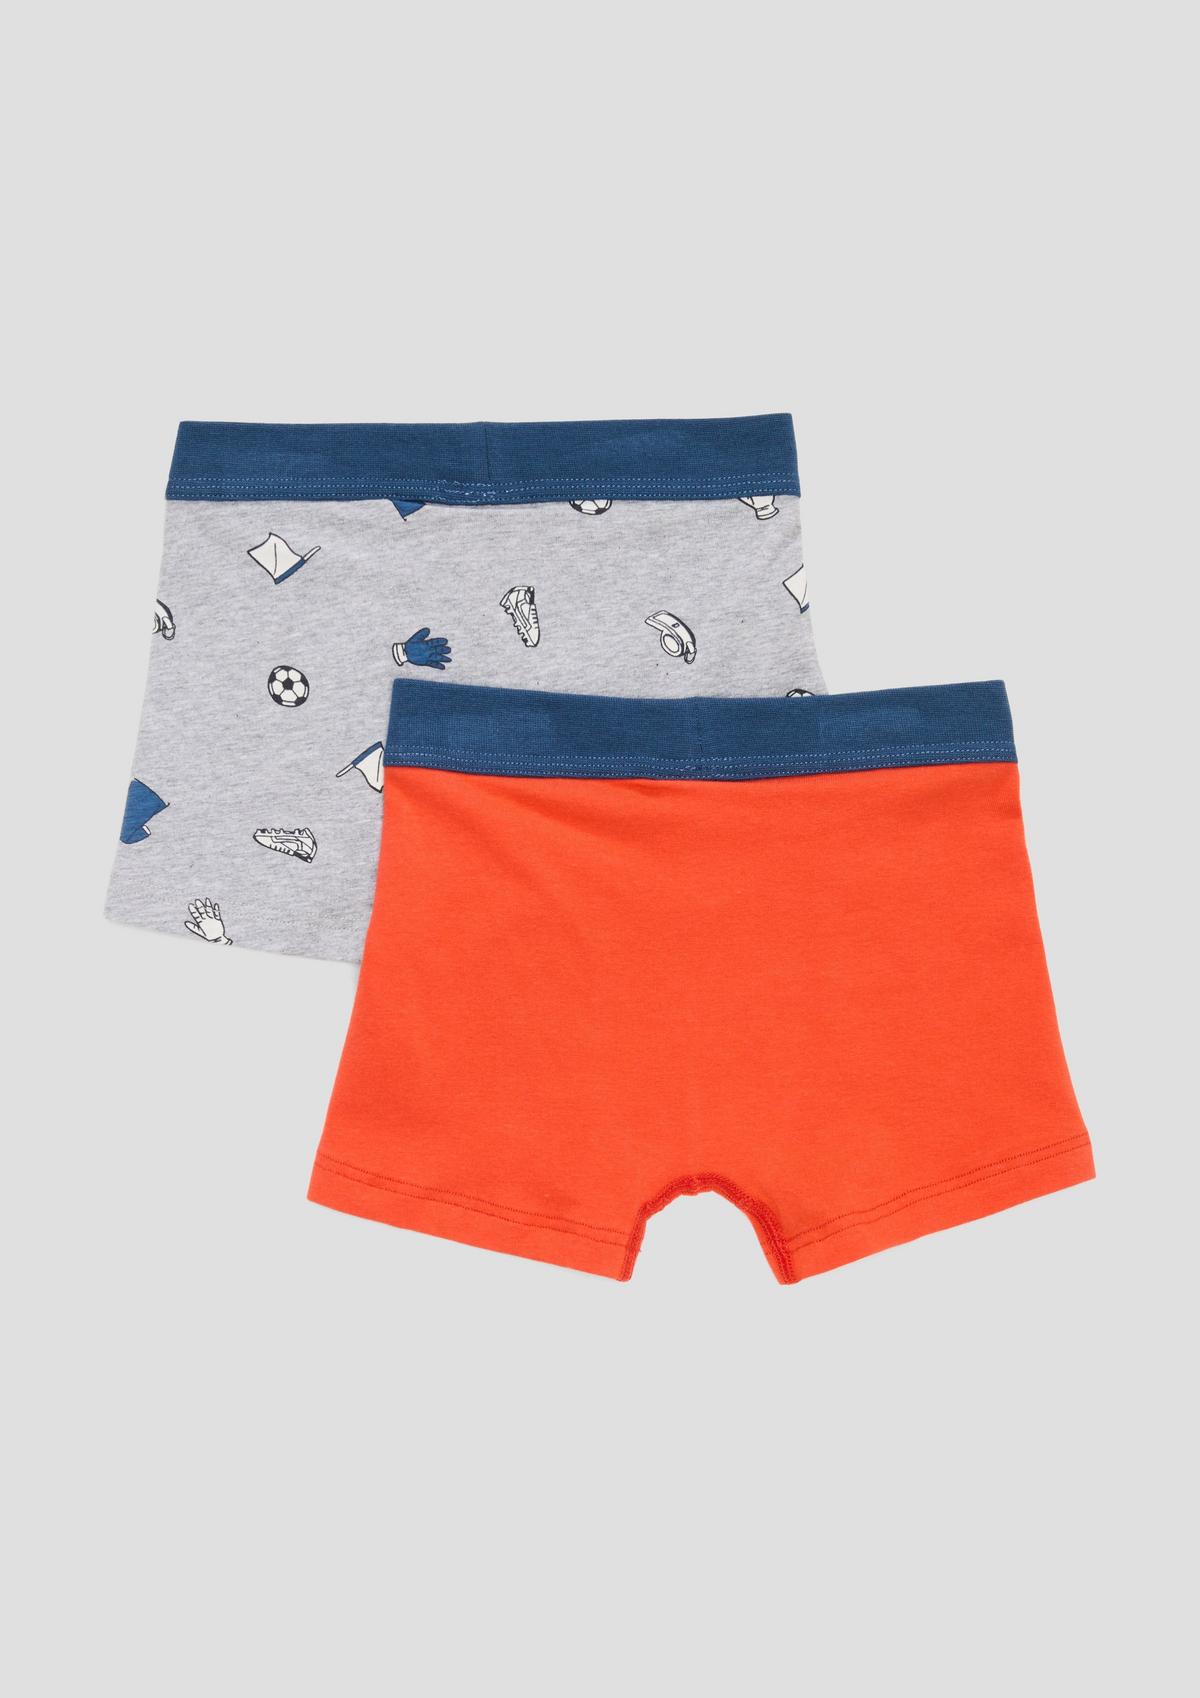 s.Oliver Doppelpack Boxershorts aus Stretch-Jersey